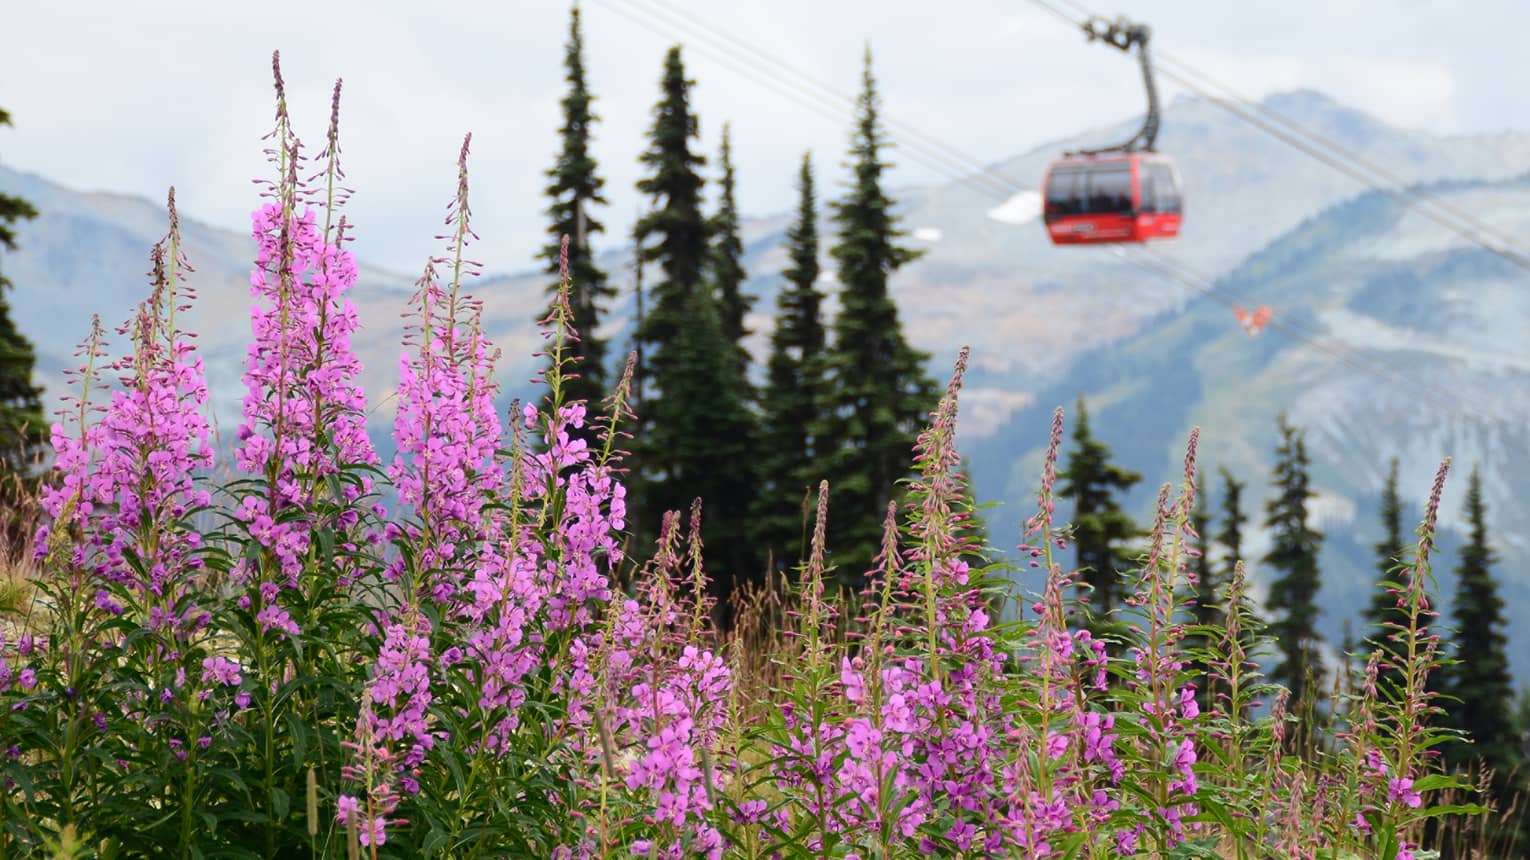 A ski lift soaring over the mountains and pink blossoms.